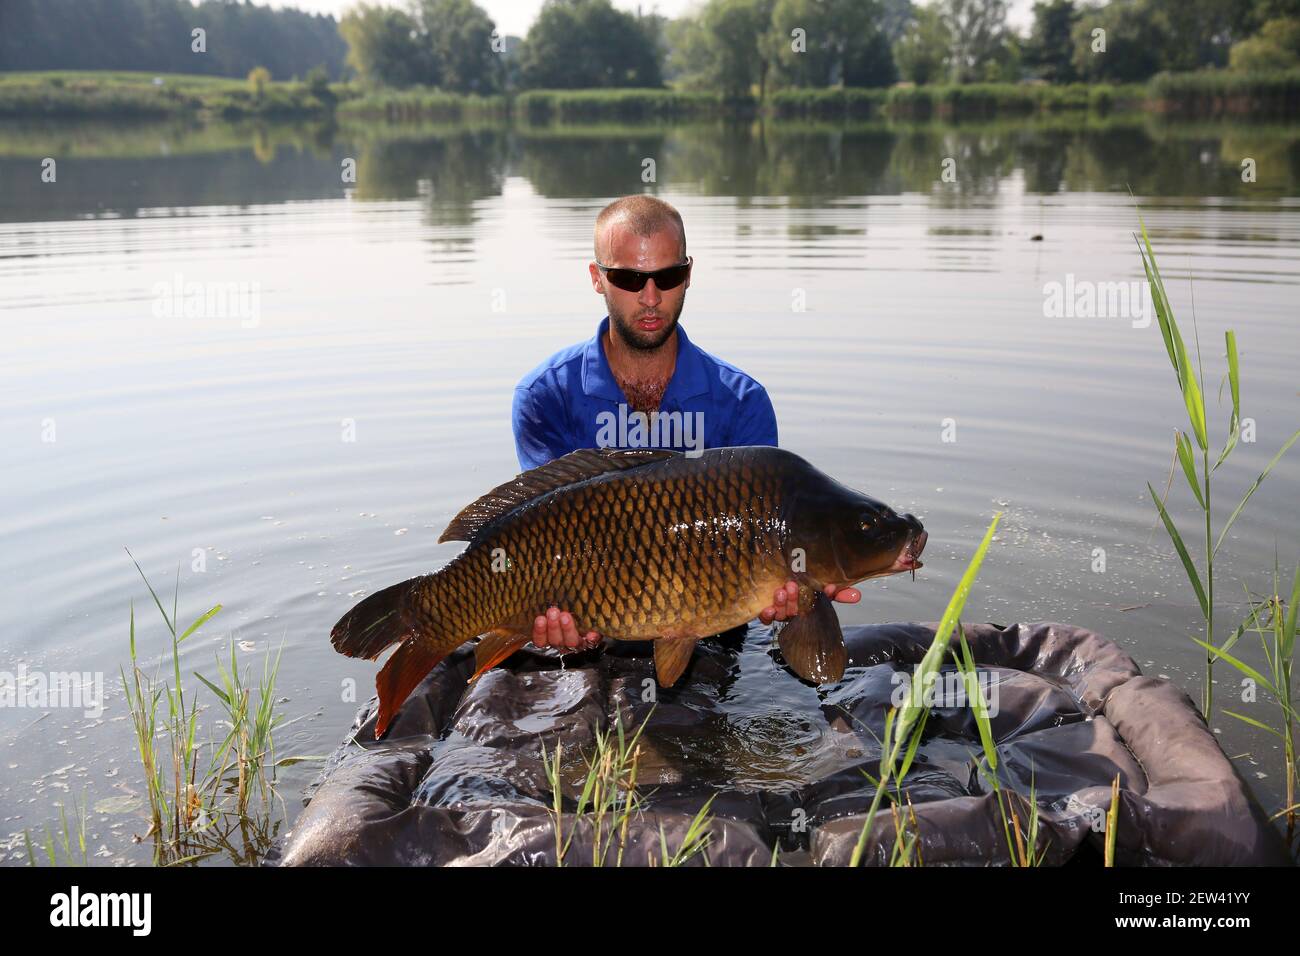 The angler has caught a nice young carp and is posing for photos The angler  casts the carp fishing kit Stock Photo - Alamy